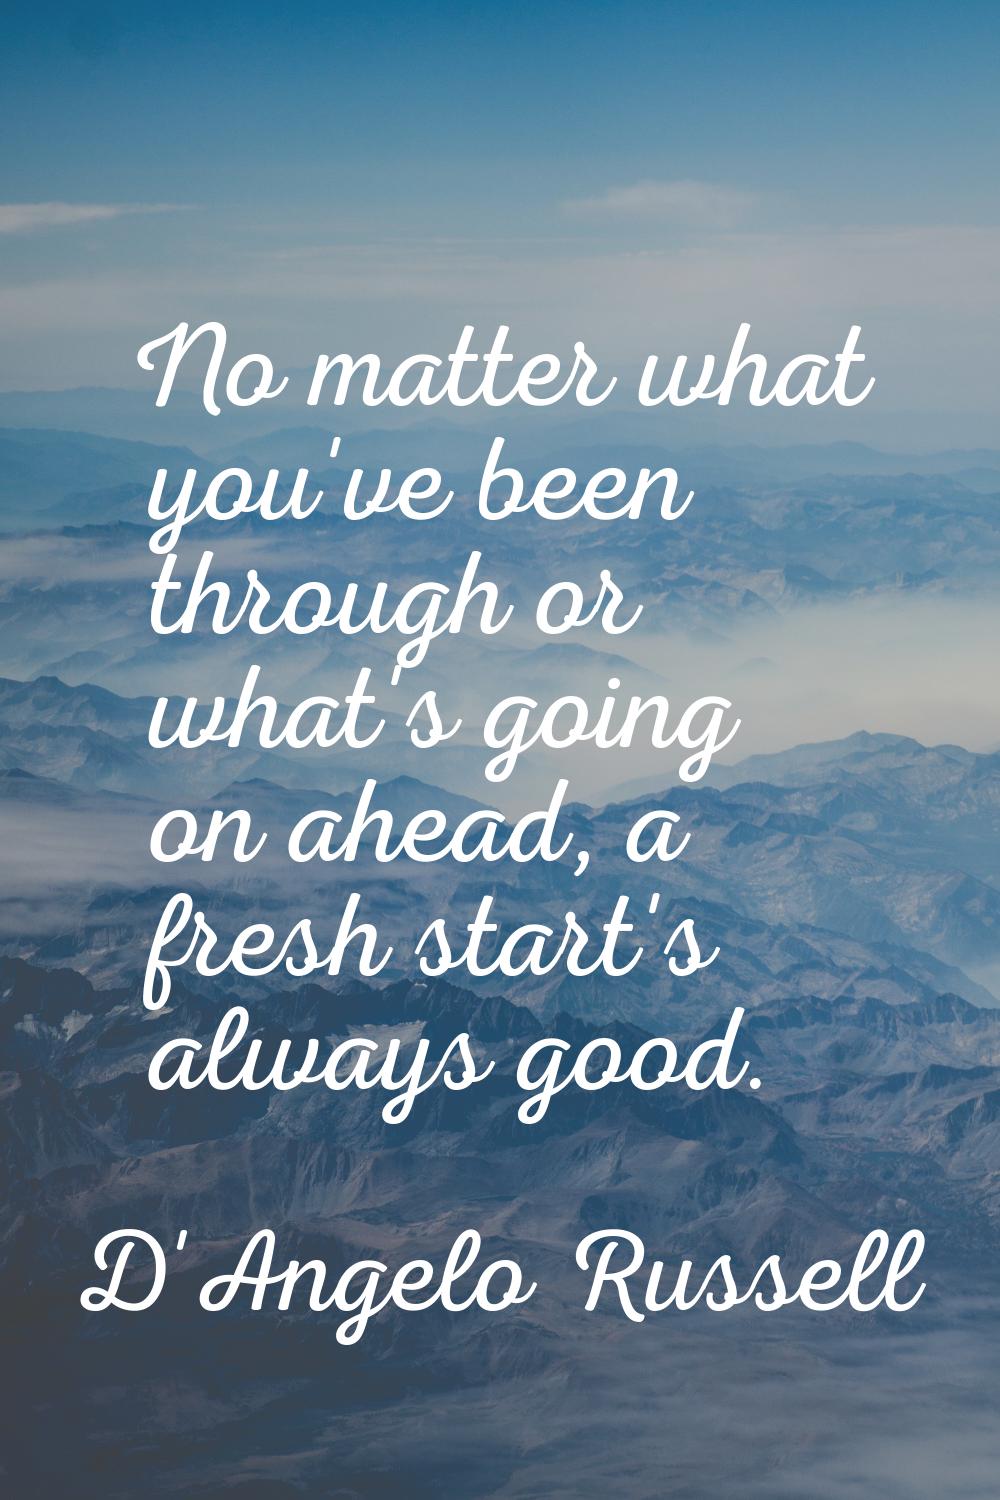 No matter what you've been through or what's going on ahead, a fresh start's always good.